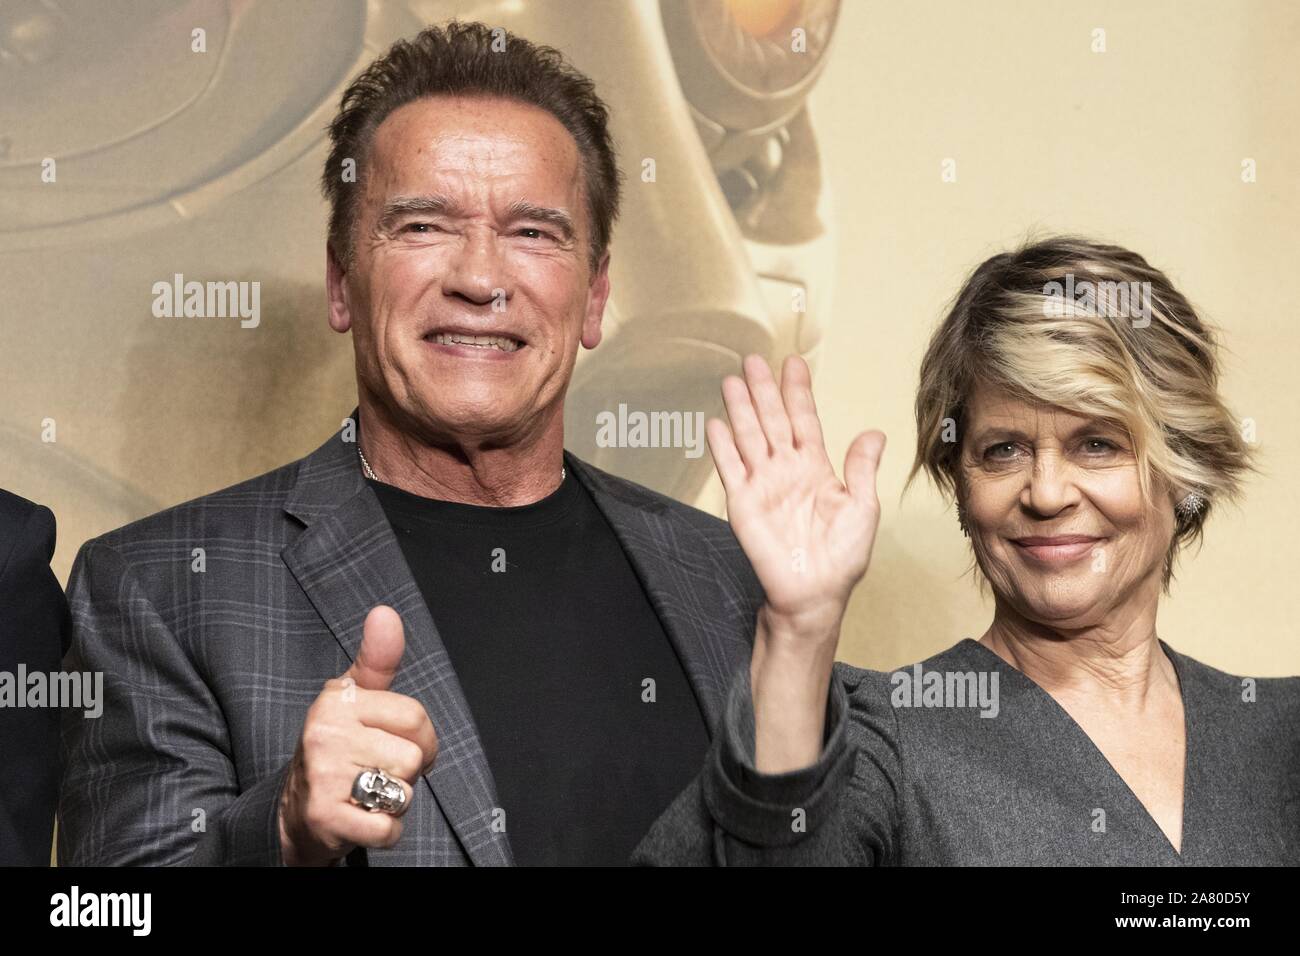 November 5, 2019, Tokyo, Japan: (L to R) Austrian-American actor Arnold Schwarzenegger and actress Linda Hamilton pose for the cameras during a news conference for the movie Terminator: Dark Fate at Bellesalle Roppongi in Tokyo. The film will be released in Japan on November 8. (Credit Image: © Rodrigo Reyes Marin/ZUMA Wire) Stock Photo